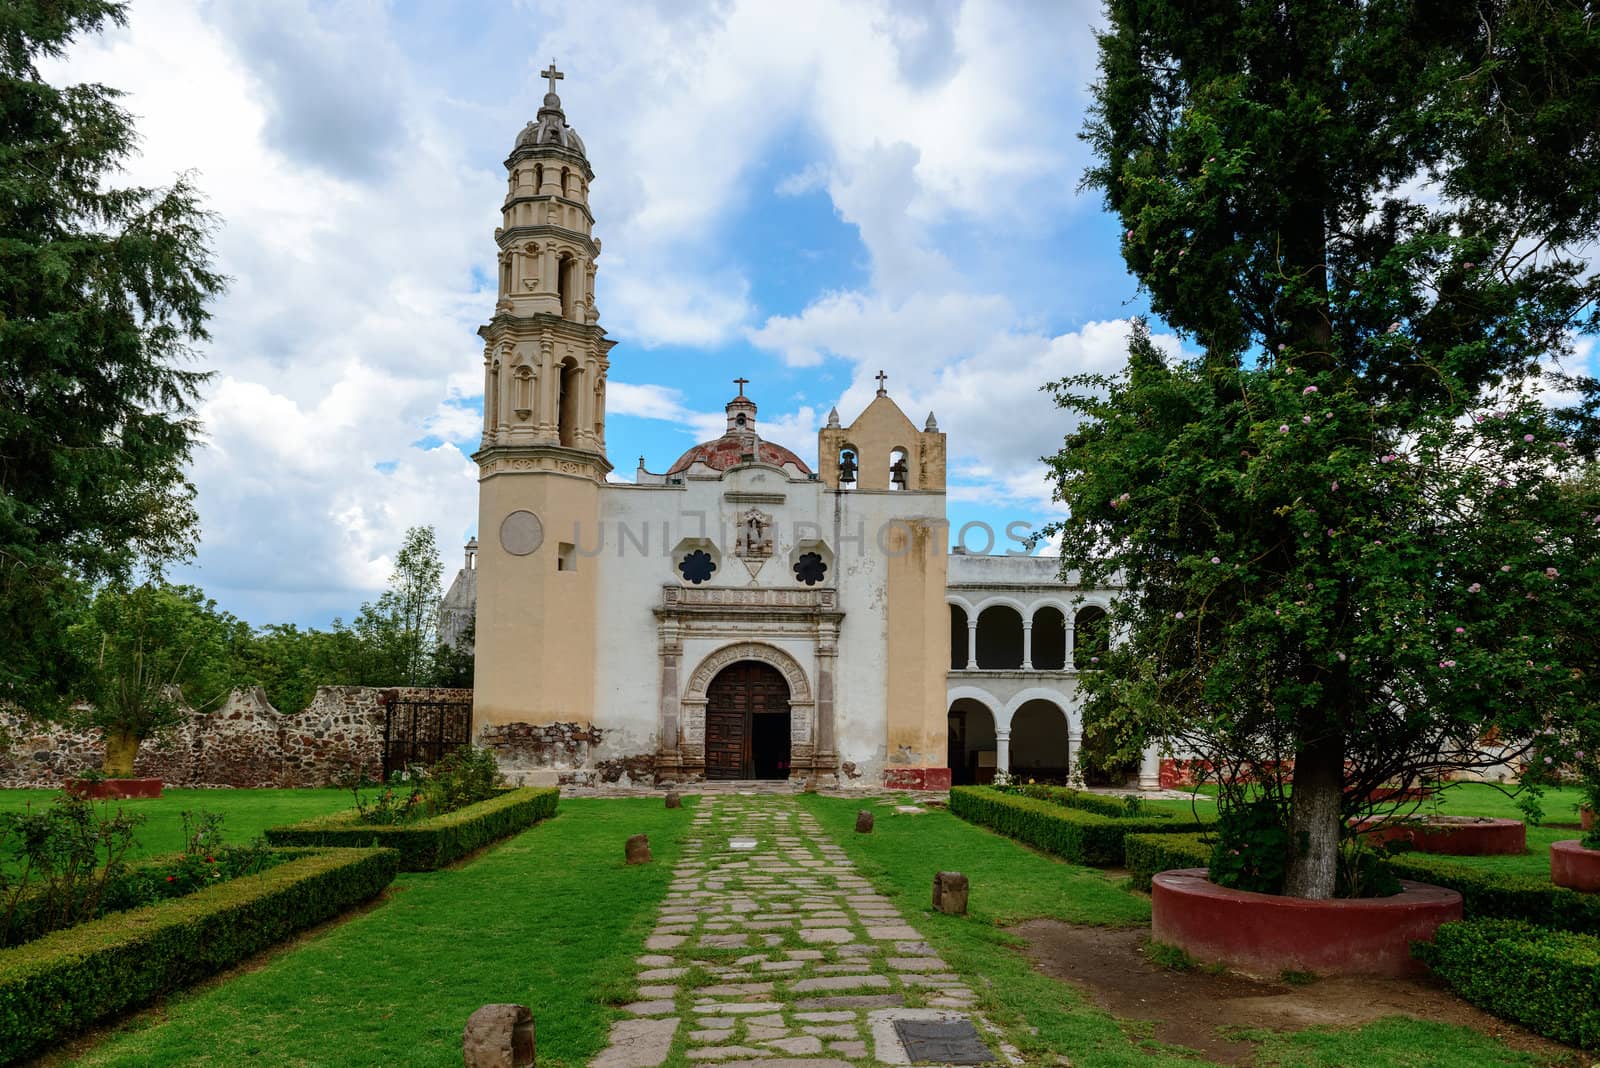 Oxtotipac church and monastery, Mexico by Marcus